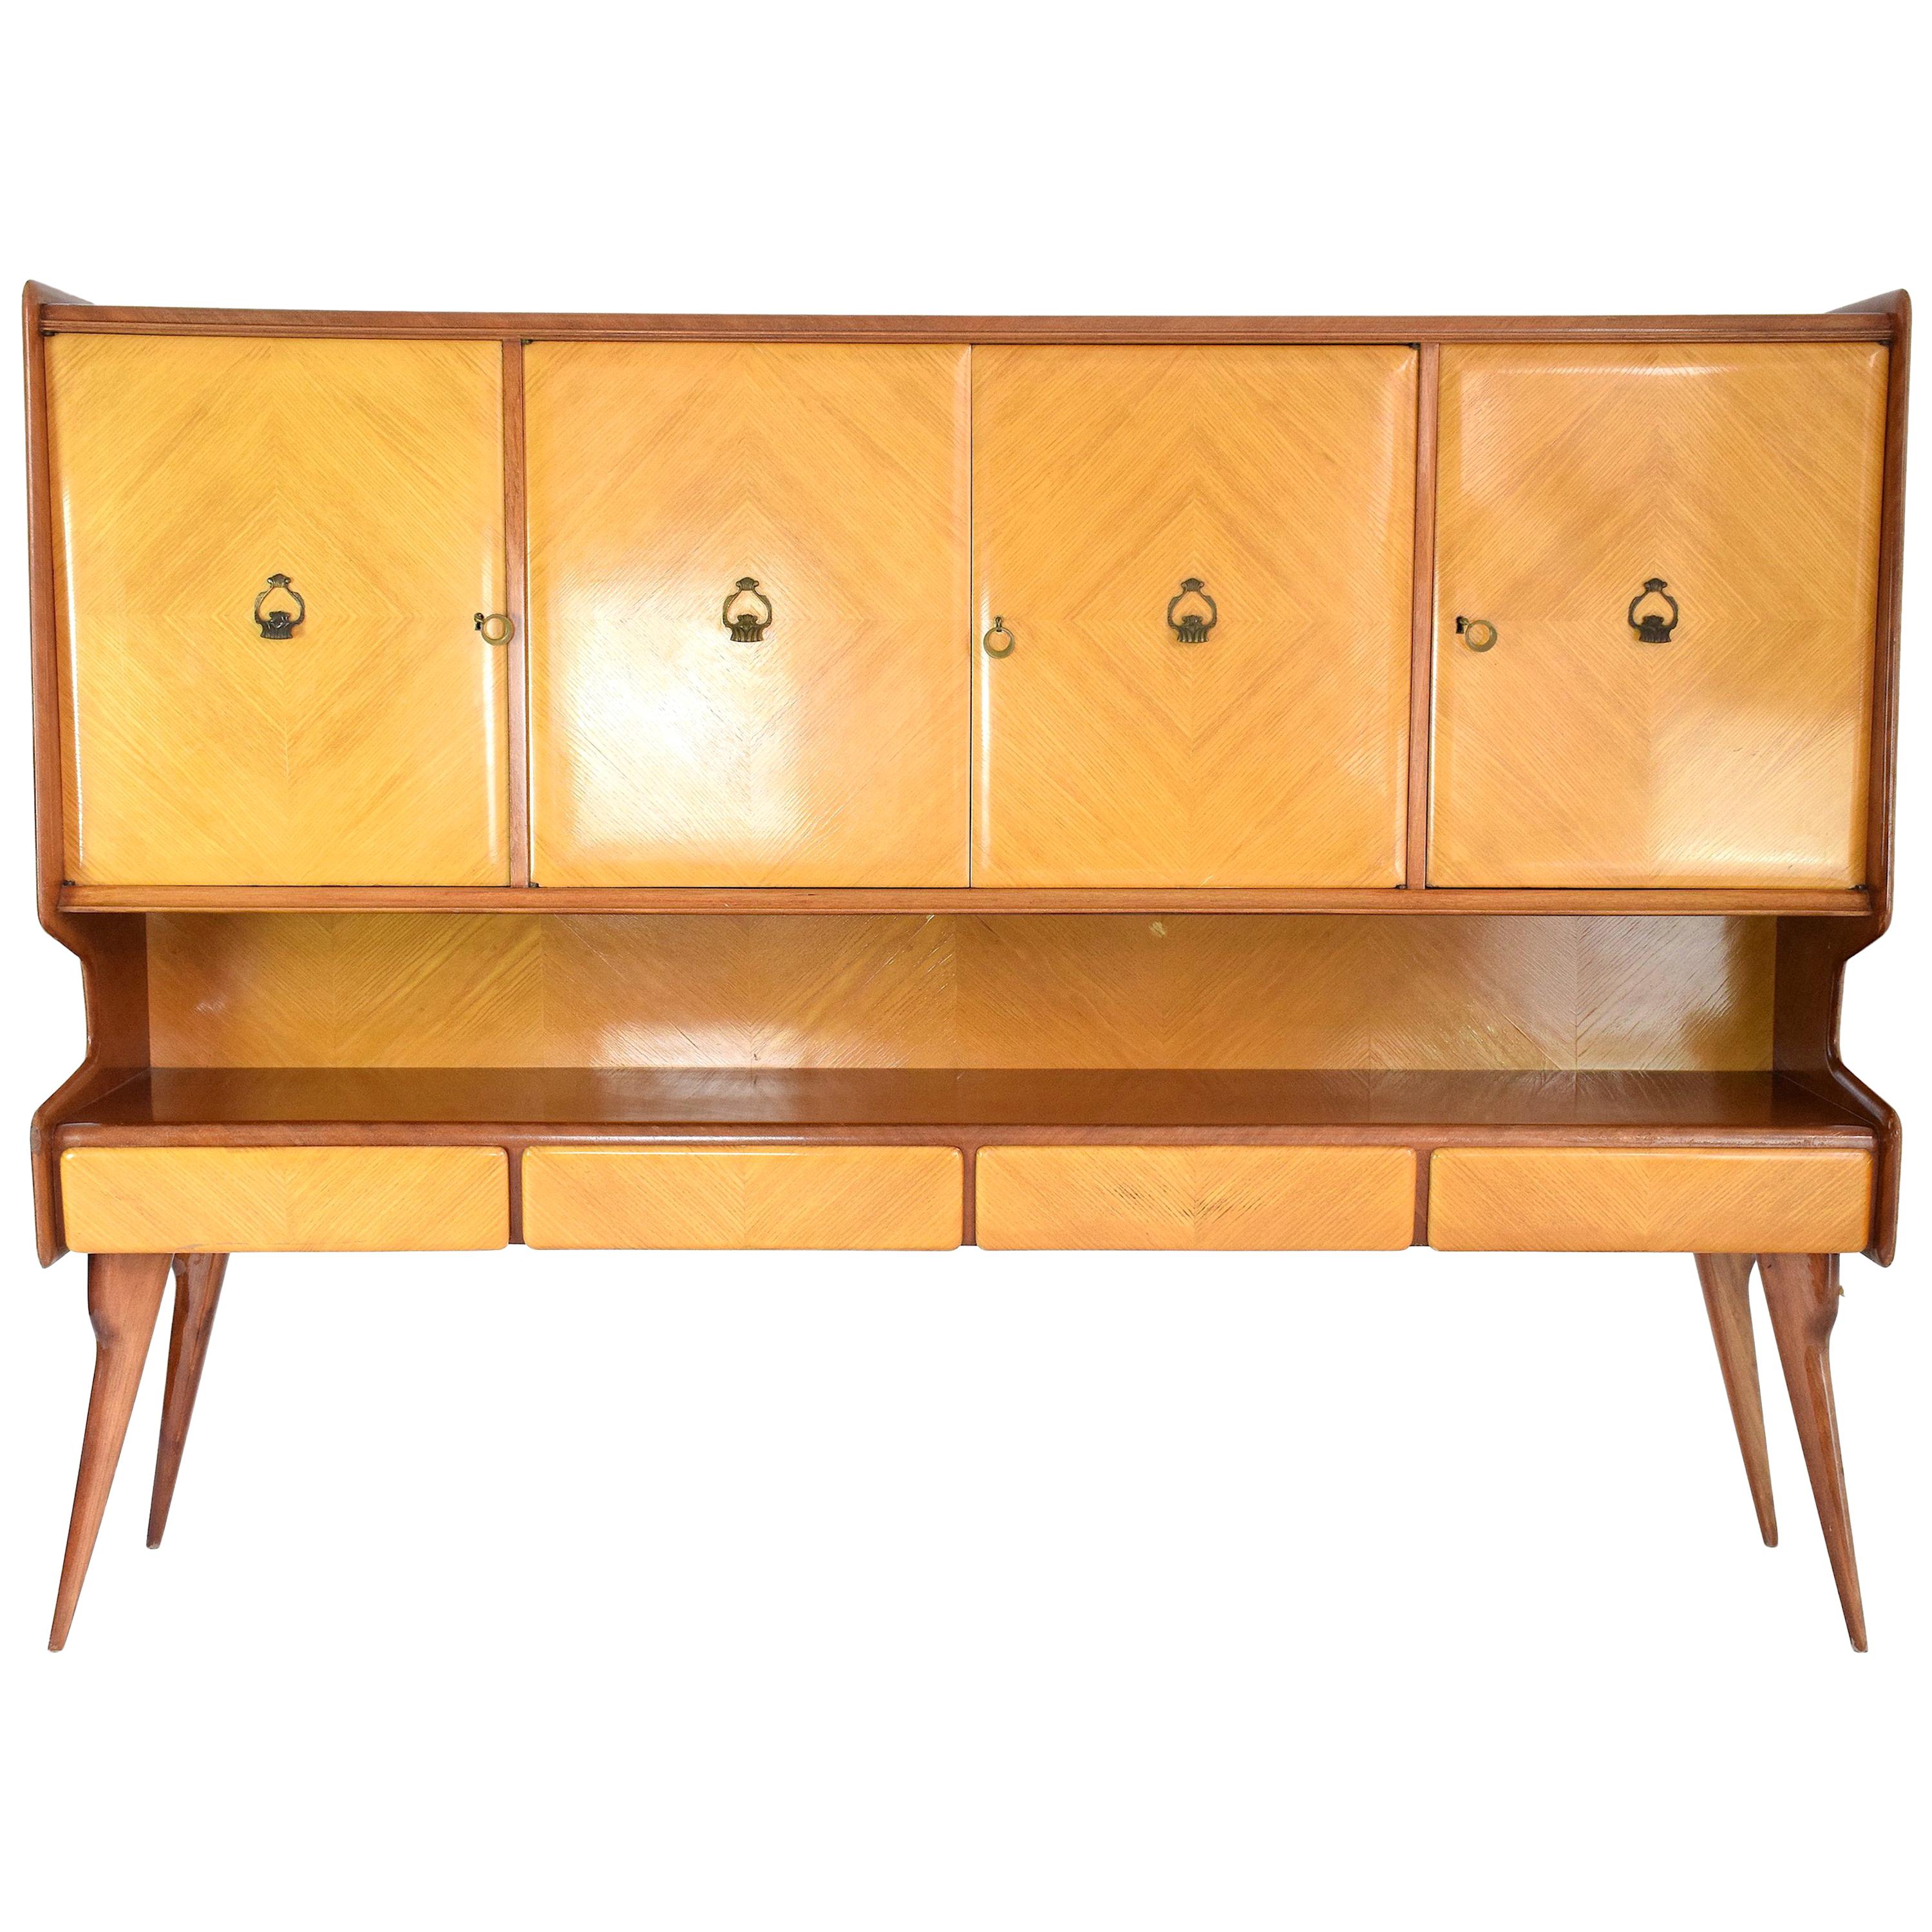 Italian Midcentury Buffet or Credenza in the Manner of Ico Parisi, 1950s